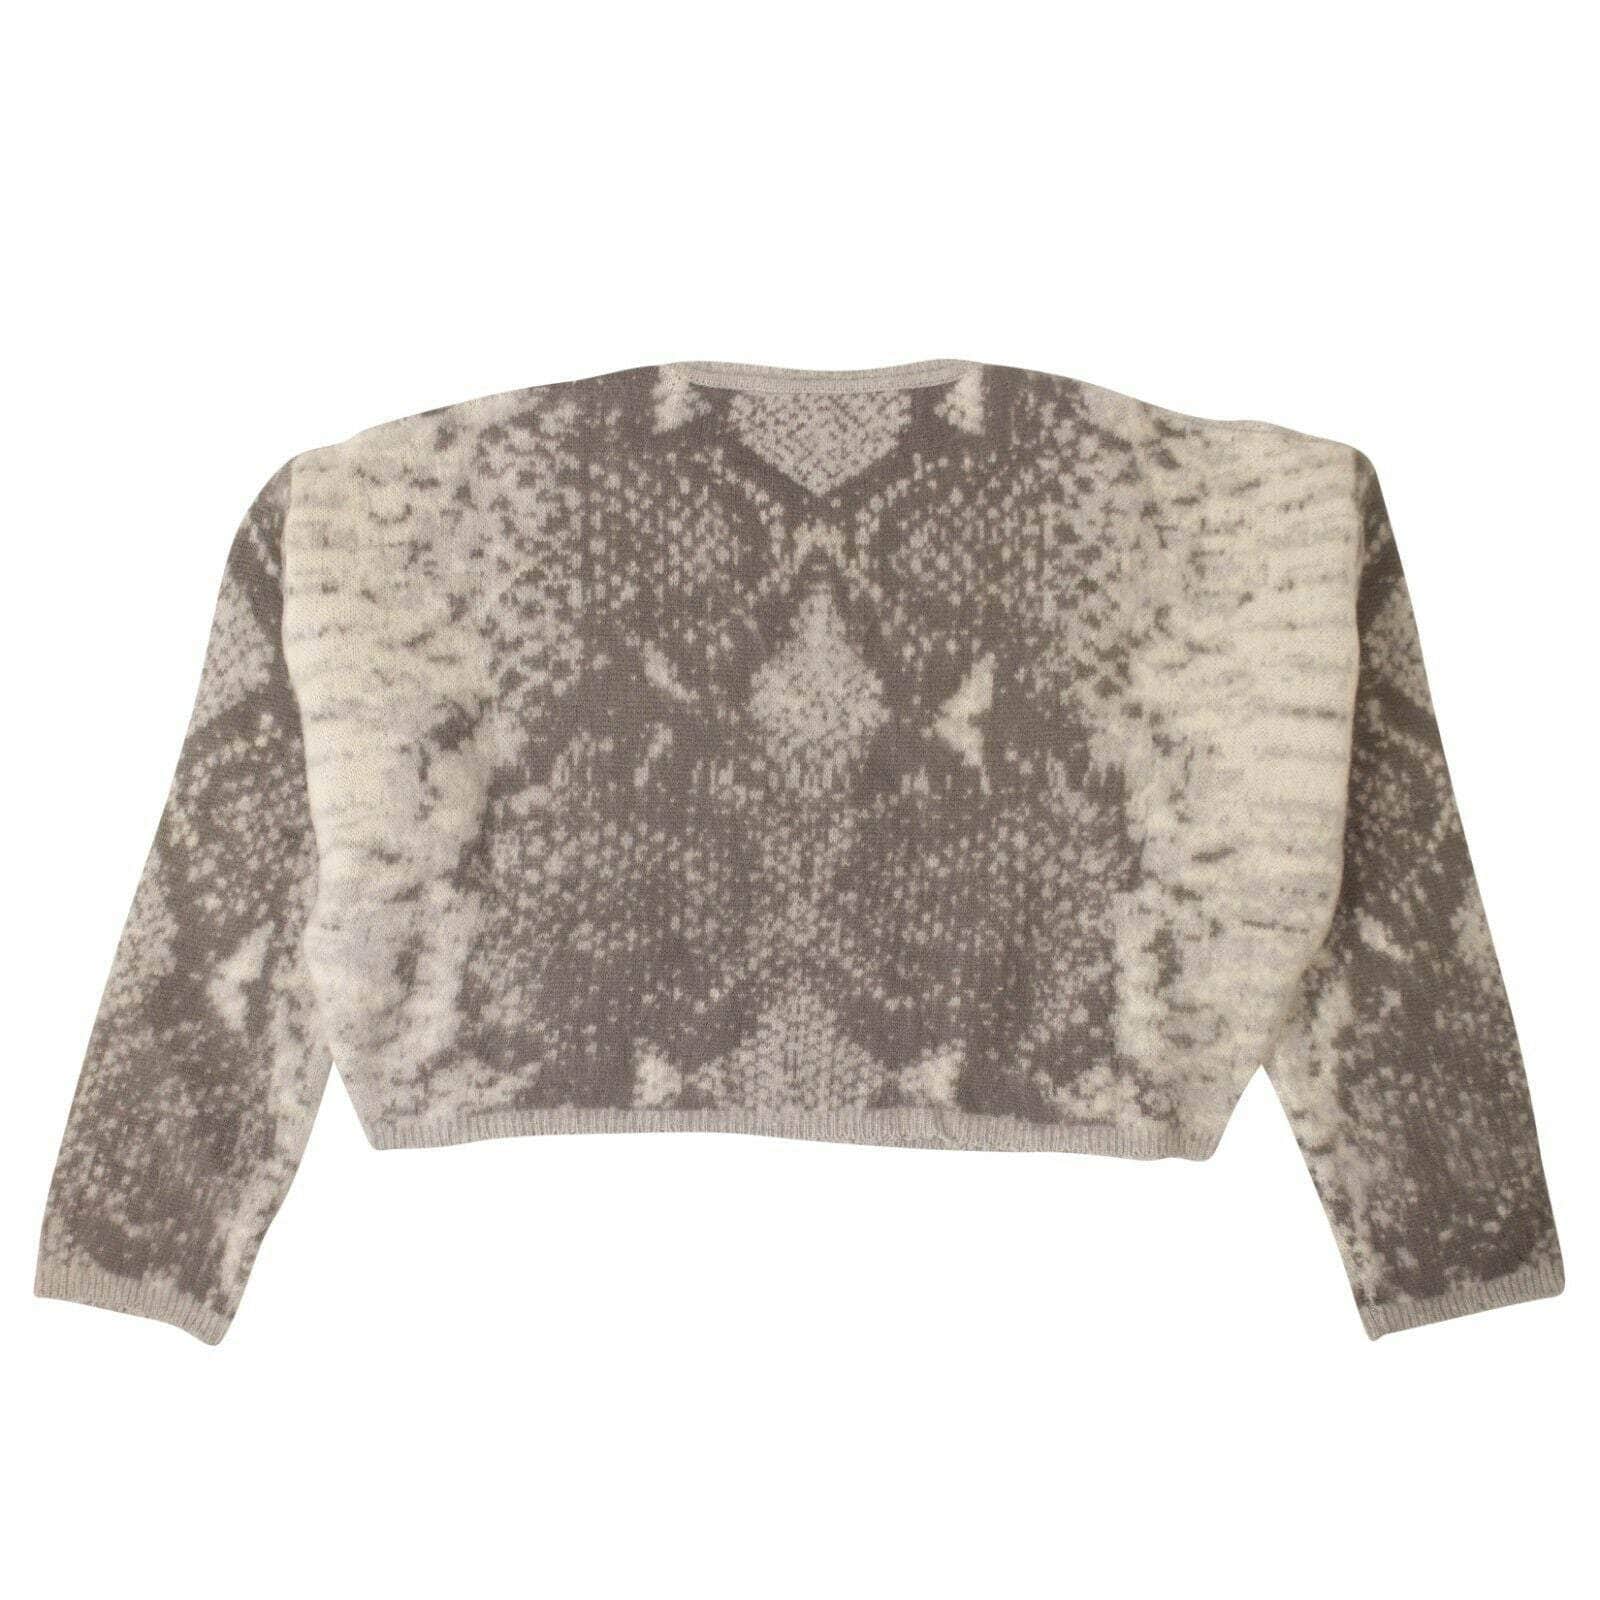 Amiri amiri, AMR, AWC1, channelenable-all, chicmi, couponcollection, gender-womens, main-clothing, size-xs, SPO, under-250, womens-cardigans XS Women's Gray Snake Print Crewneck Sweater 93-AMR-1142/XS 93-AMR-1142/XS